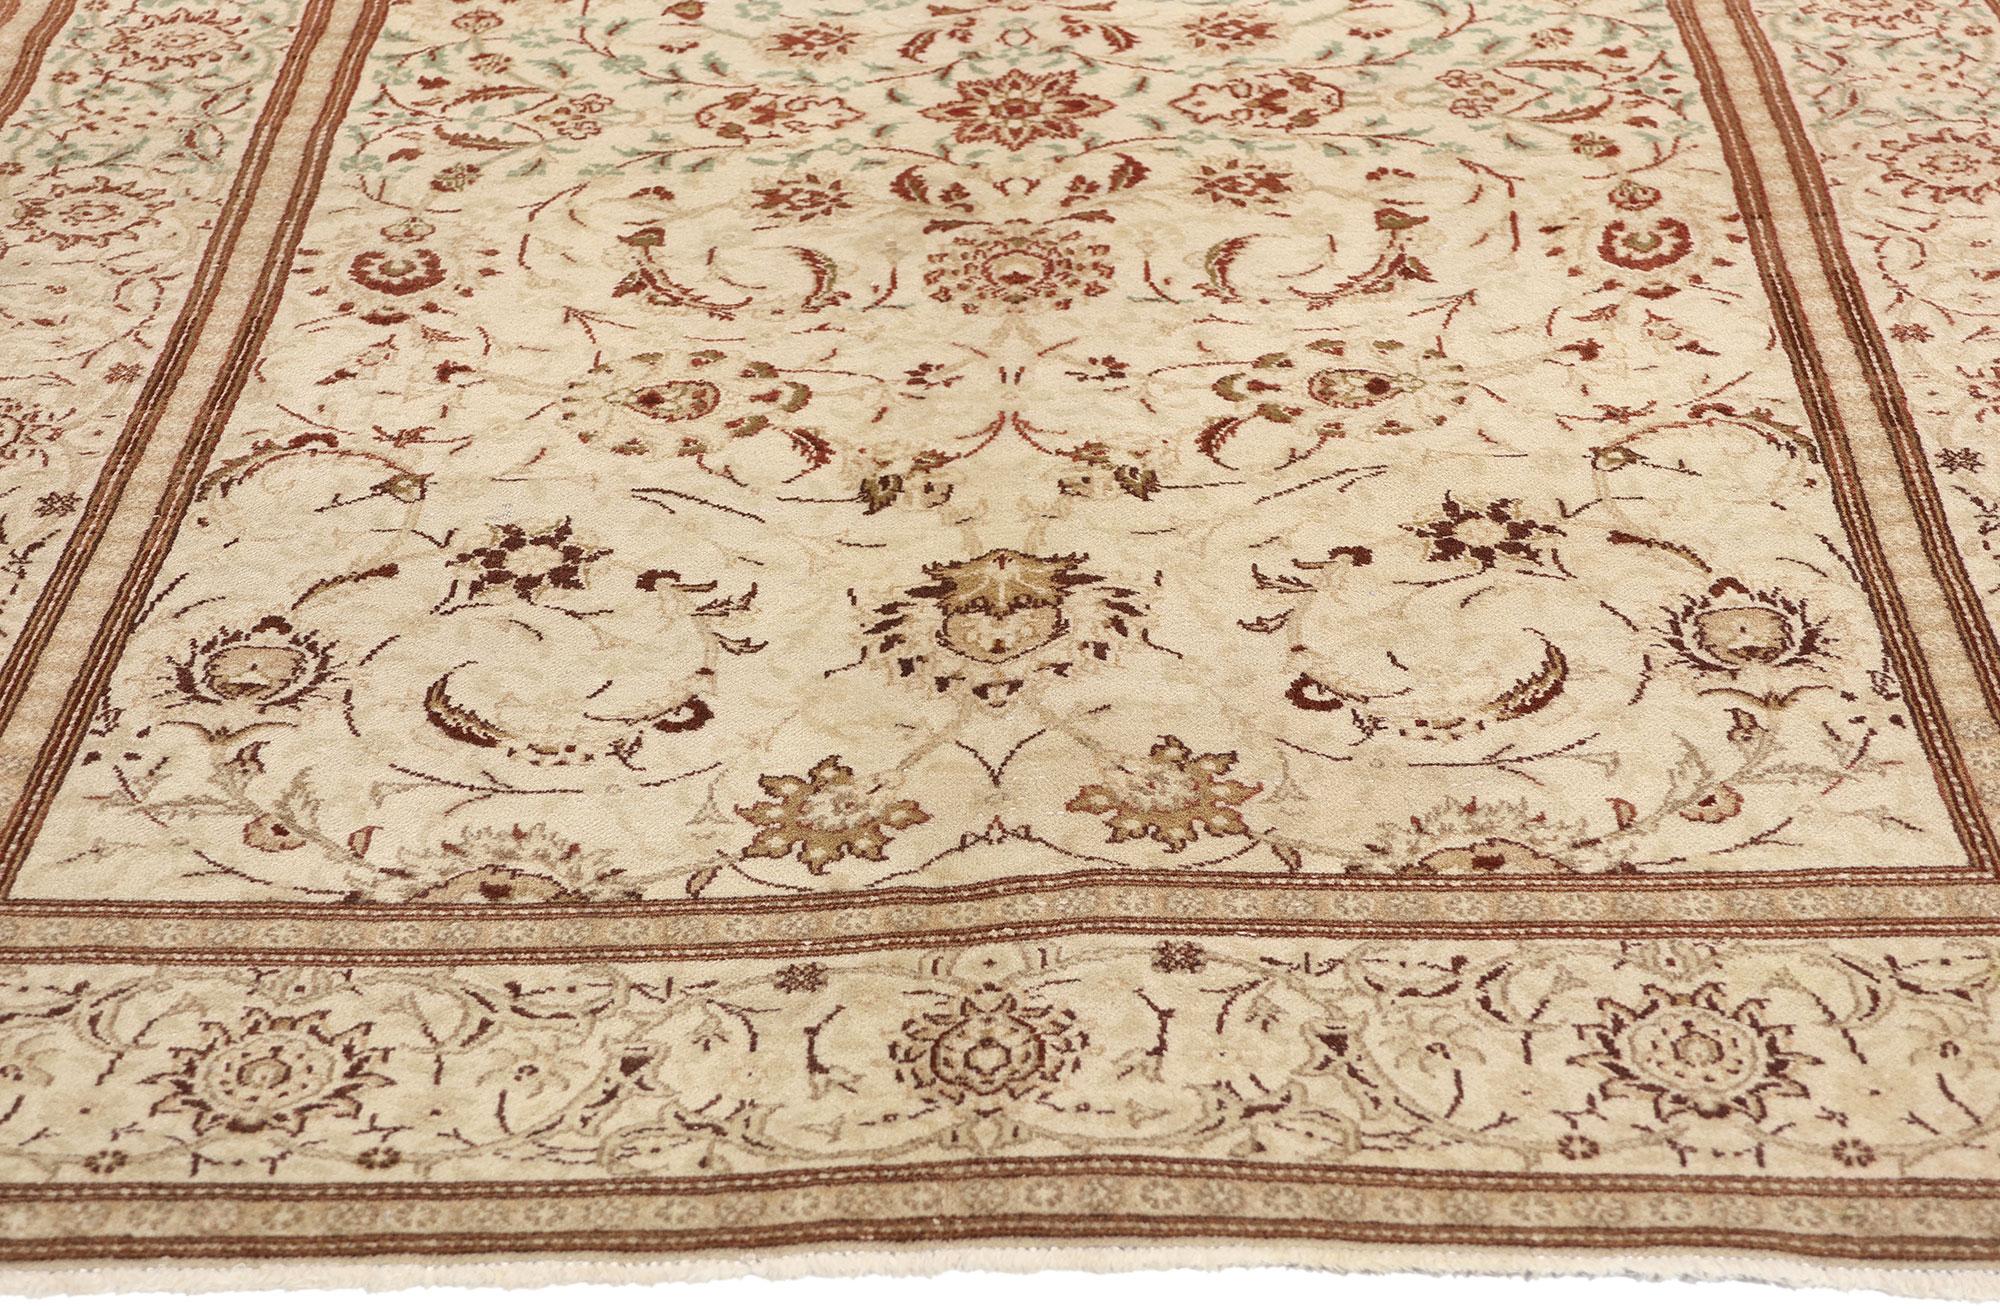 Antique Persian Kashan Rug, Classic Elegance Meets Traditional Sensibility In Good Condition For Sale In Dallas, TX